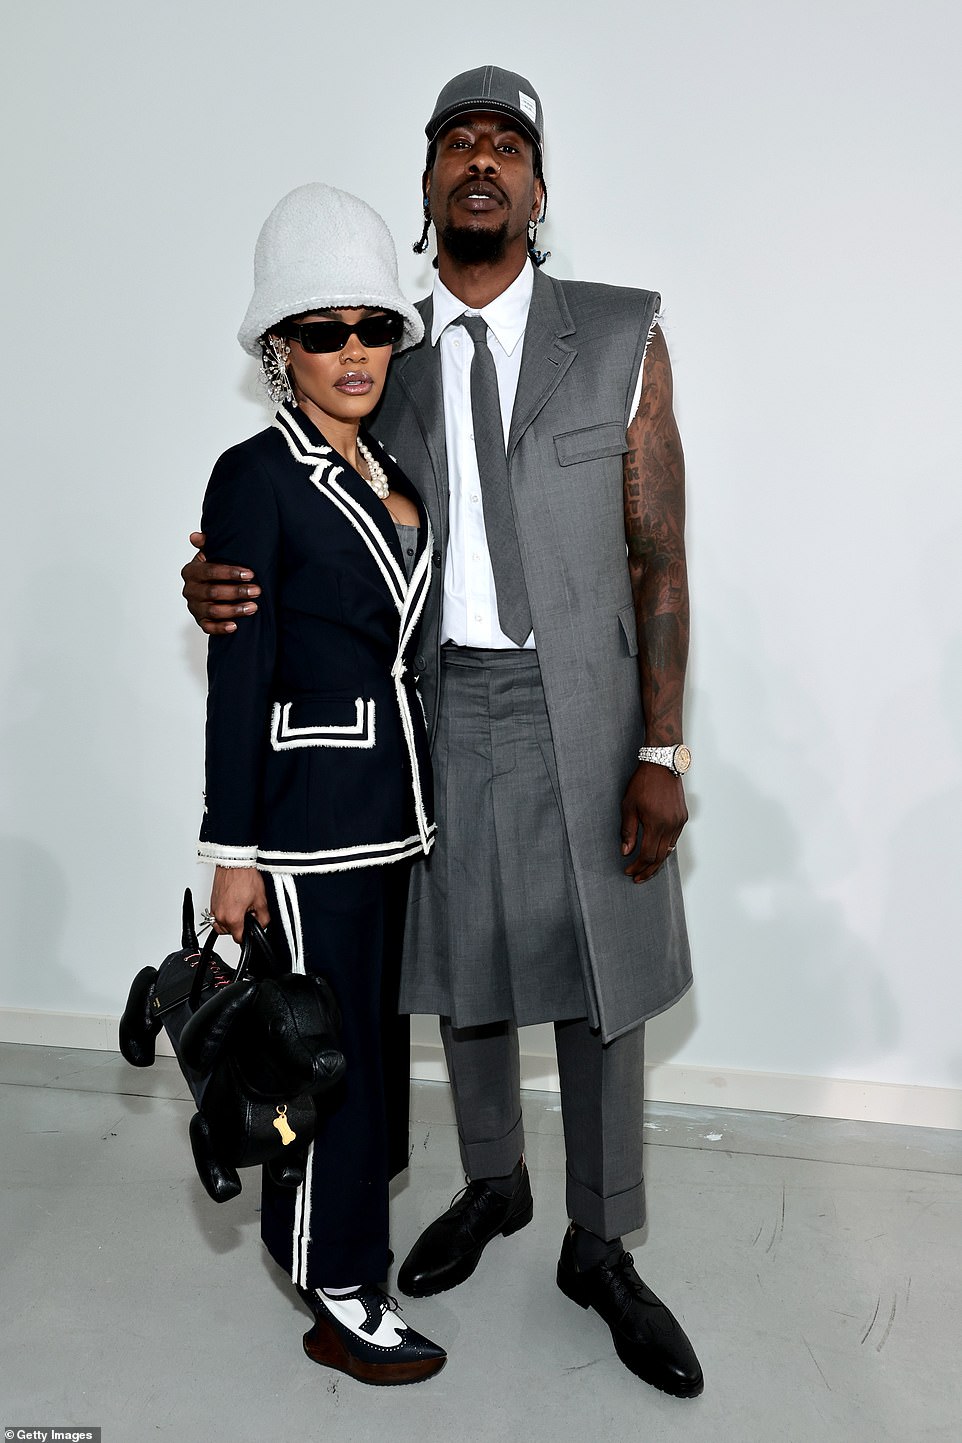 Cute couple: Teyana Taylor looked stylish in a black tweed suit with white trim, along with a black dog-shaped handbag and cool black-and-white saddle shoe–style heels. Her husband Iman Shumpert wore a long gray sleeveless overcoat with a whit shirt, a gray pleated skirt and cuffed trousers underneath